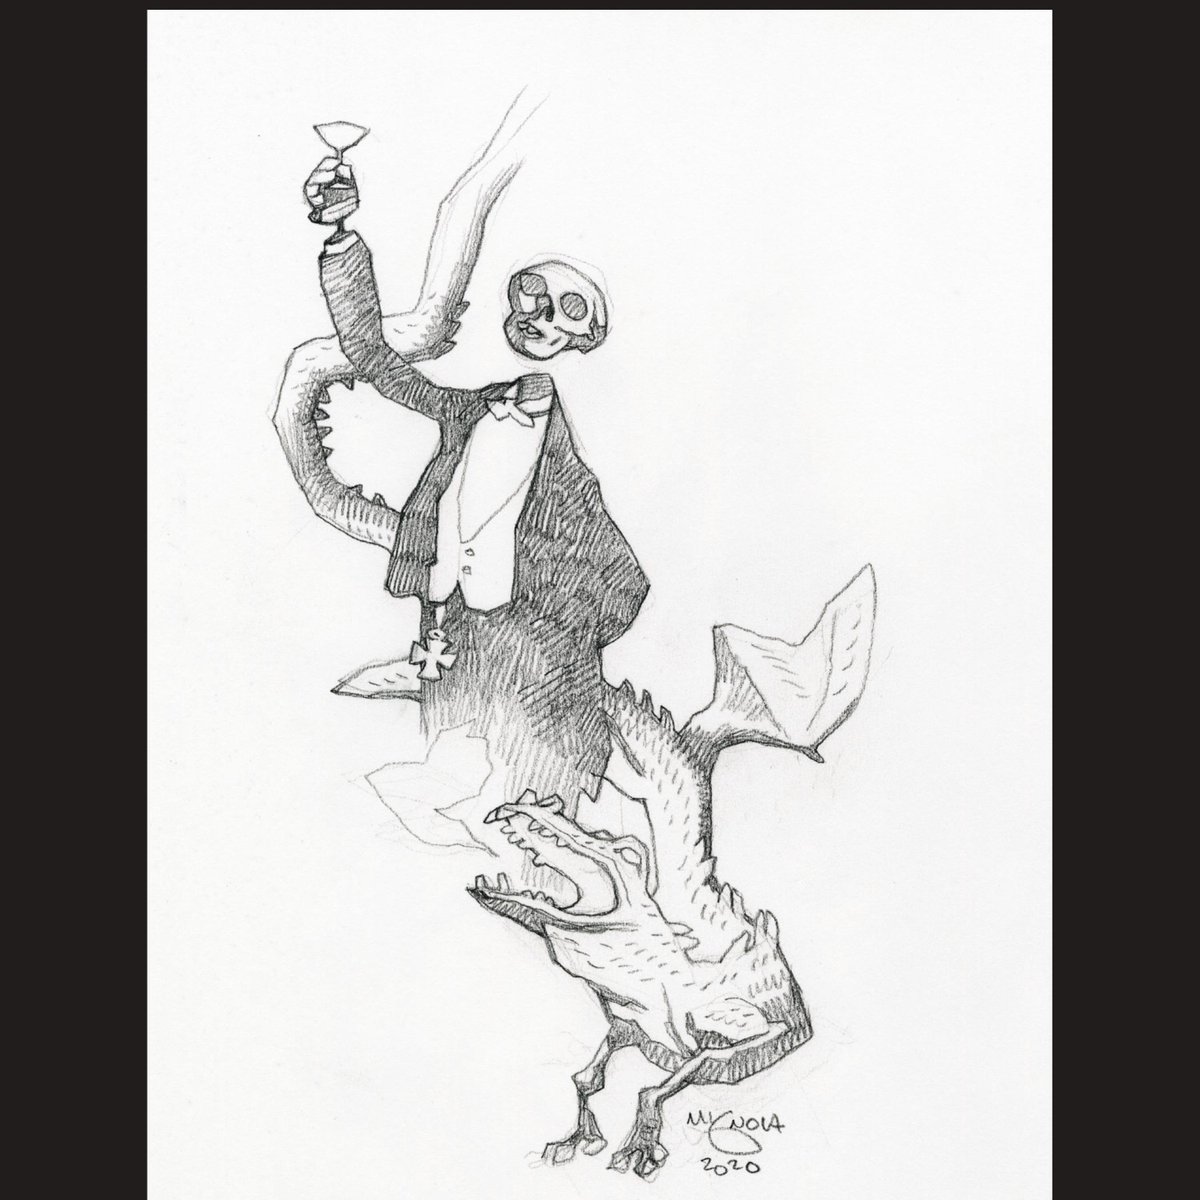 MIKE MIGNOLA: THE QUARANTINE SKETCHBOOK goes on  sale in bookstores today. All profits go to @chefjoseandres'   @WCKitchen.

https://t.co/w7TeTZFyKx 